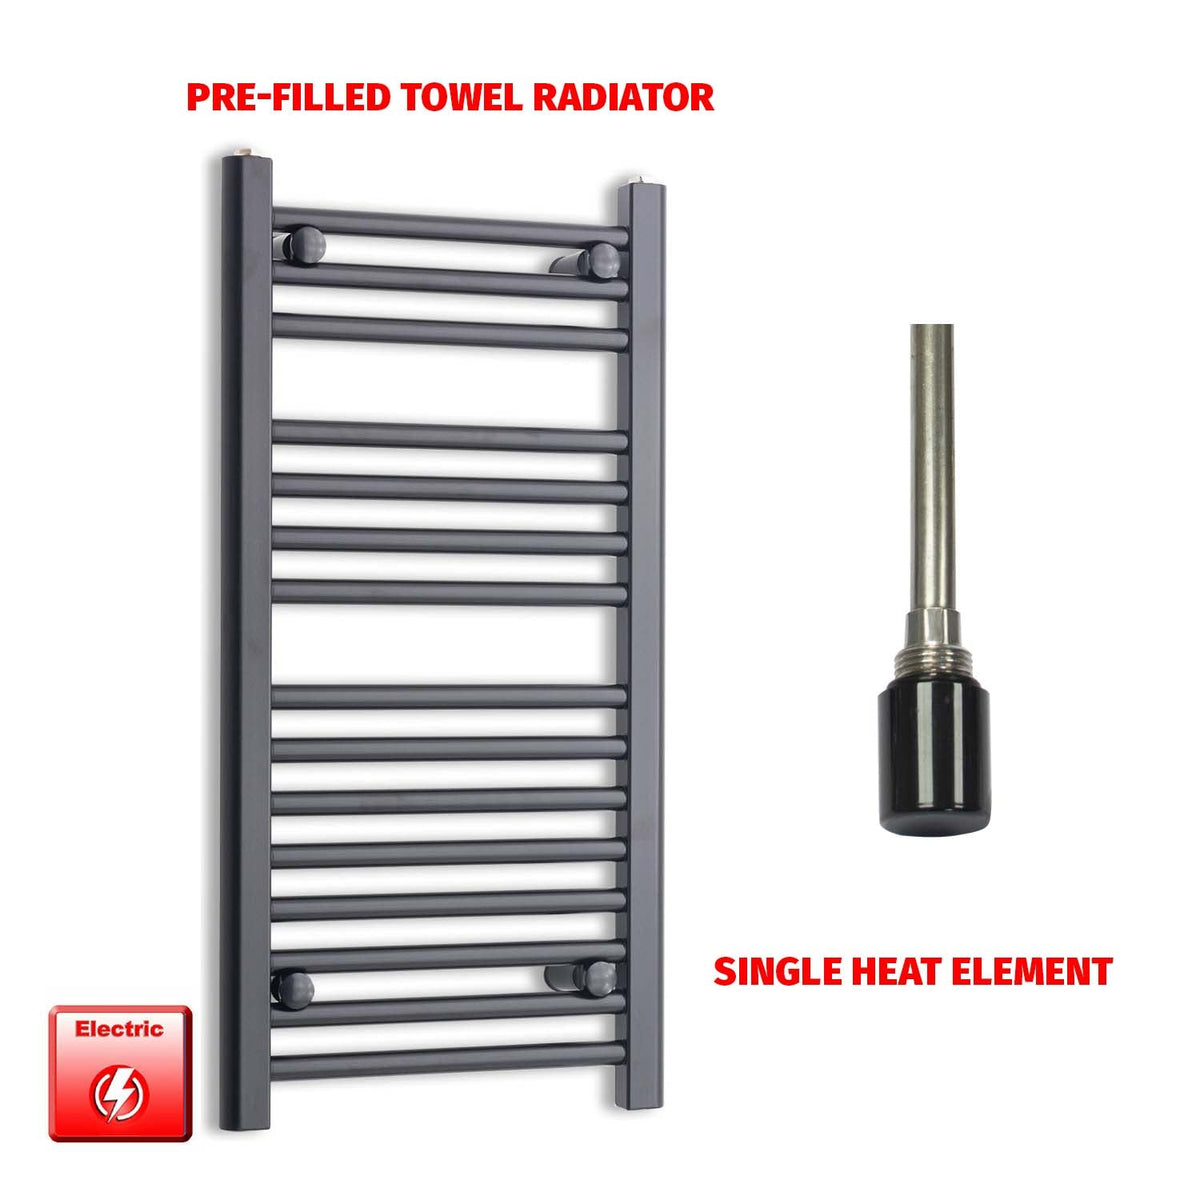 800mm High 400mm Wide Flat Black Pre-Filled Electric Heated Towel Radiator HTR Single No Timer